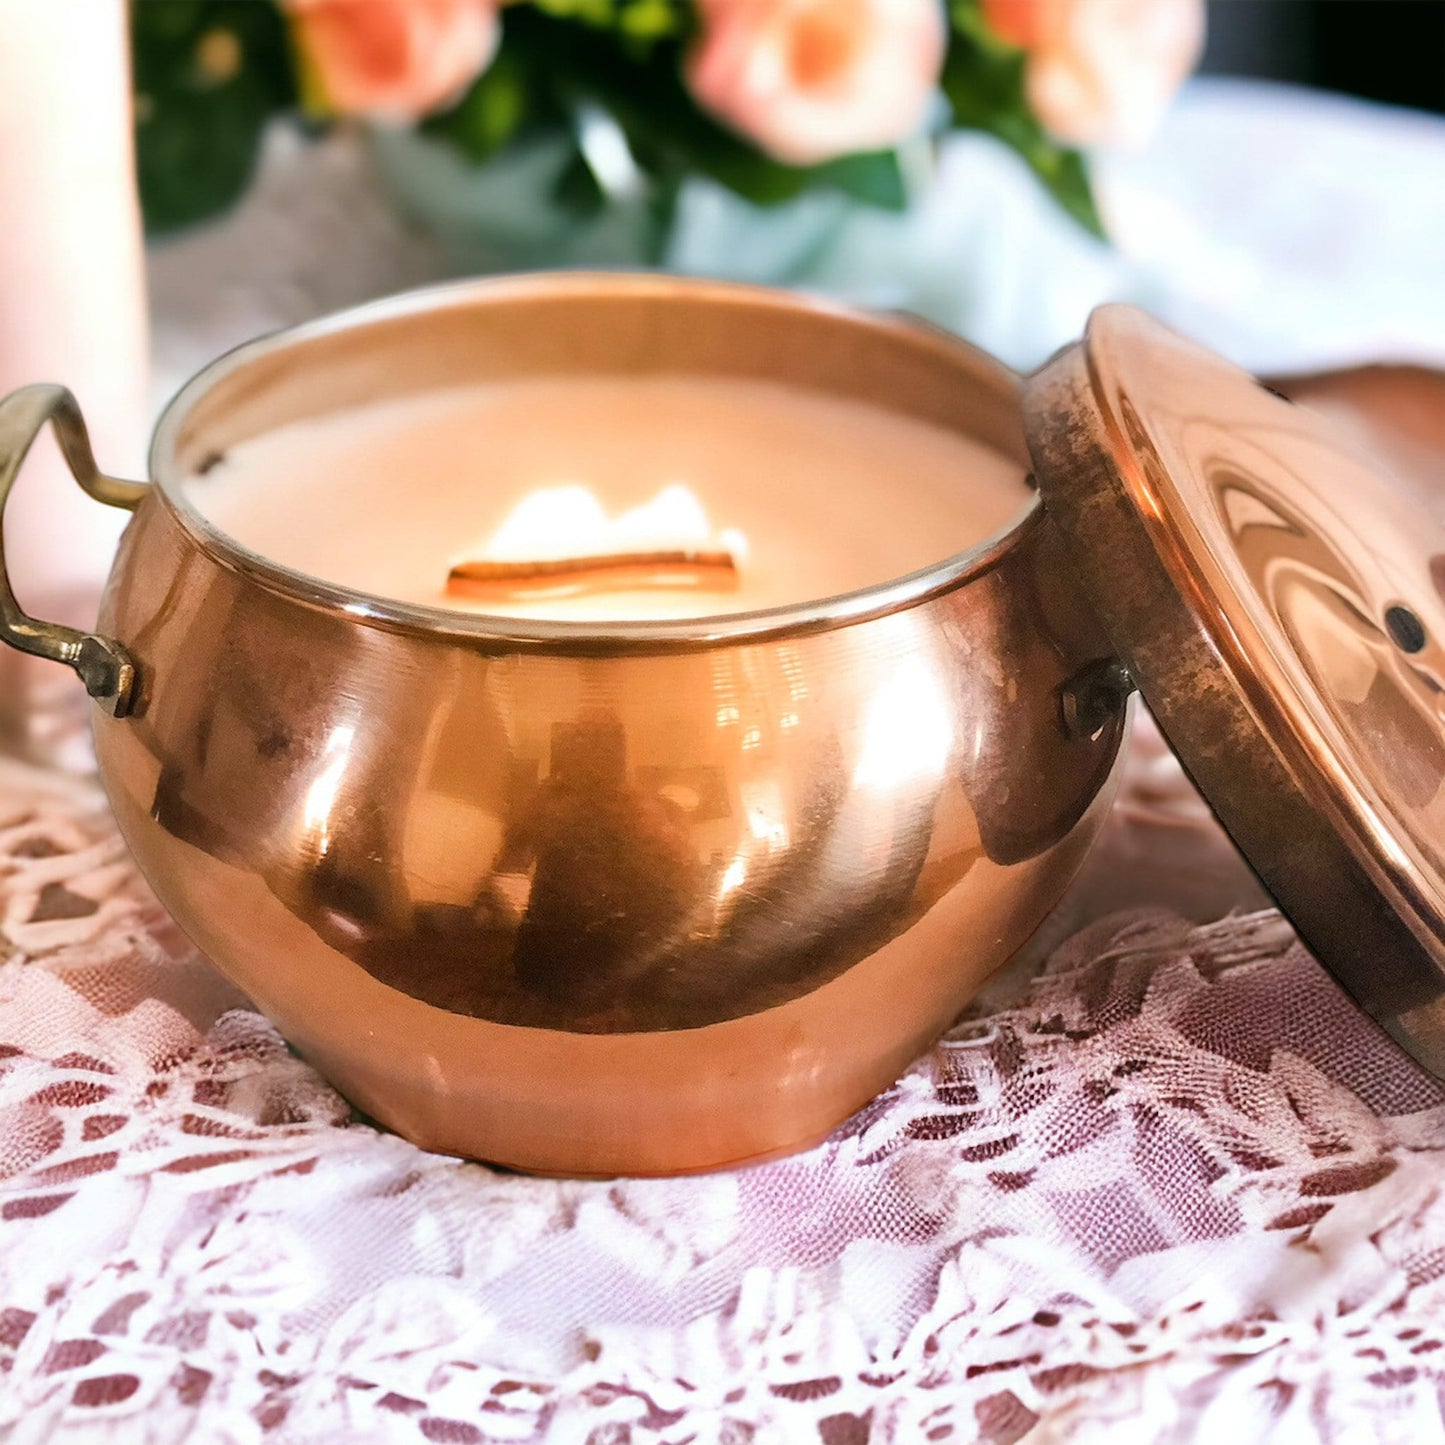 Scented Candles, Vintage, Copper Pot, Housewarming Gift, Best Friend Gifts